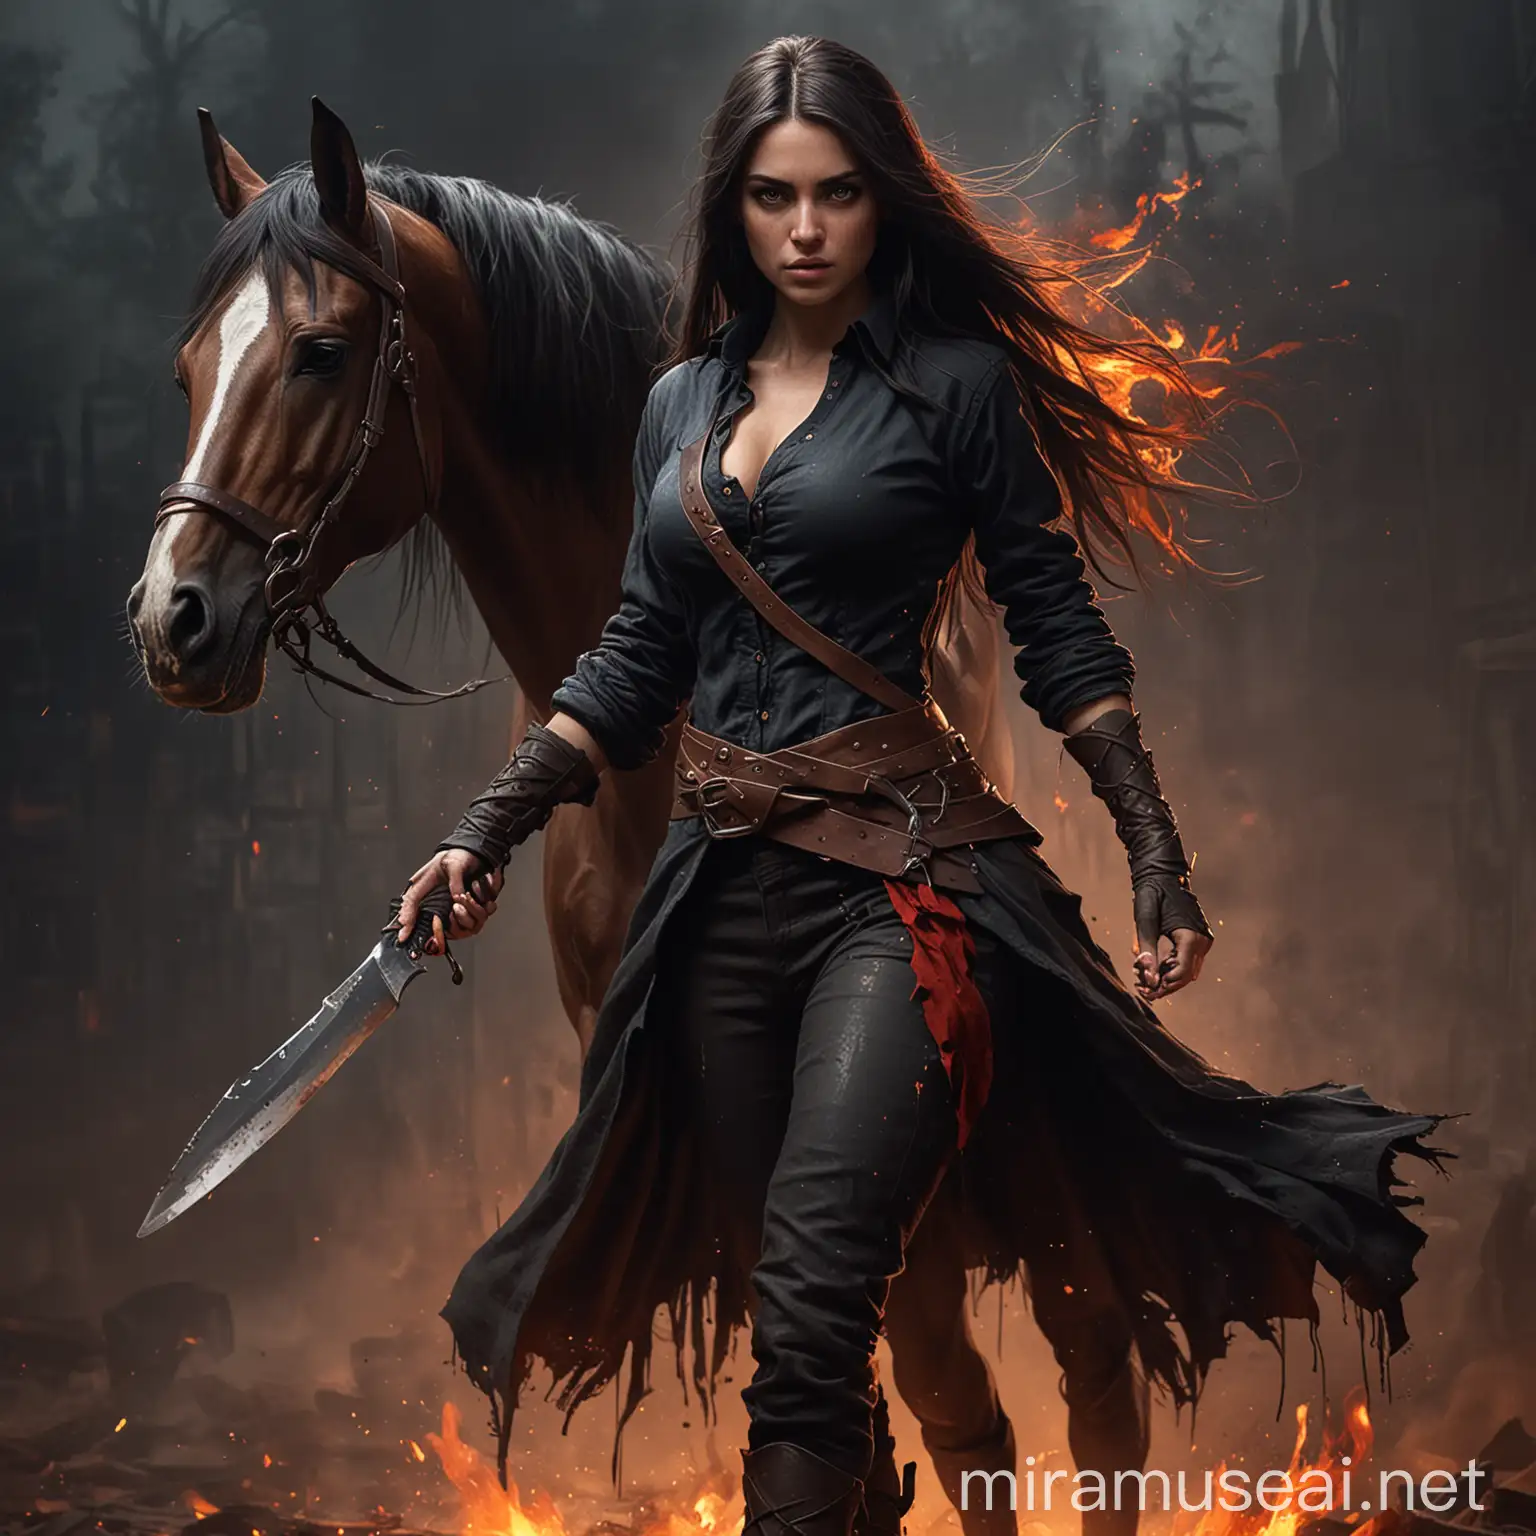 Fiery KnifeThrowing Girl with Dark Hair and HorseStable Hand Clothes